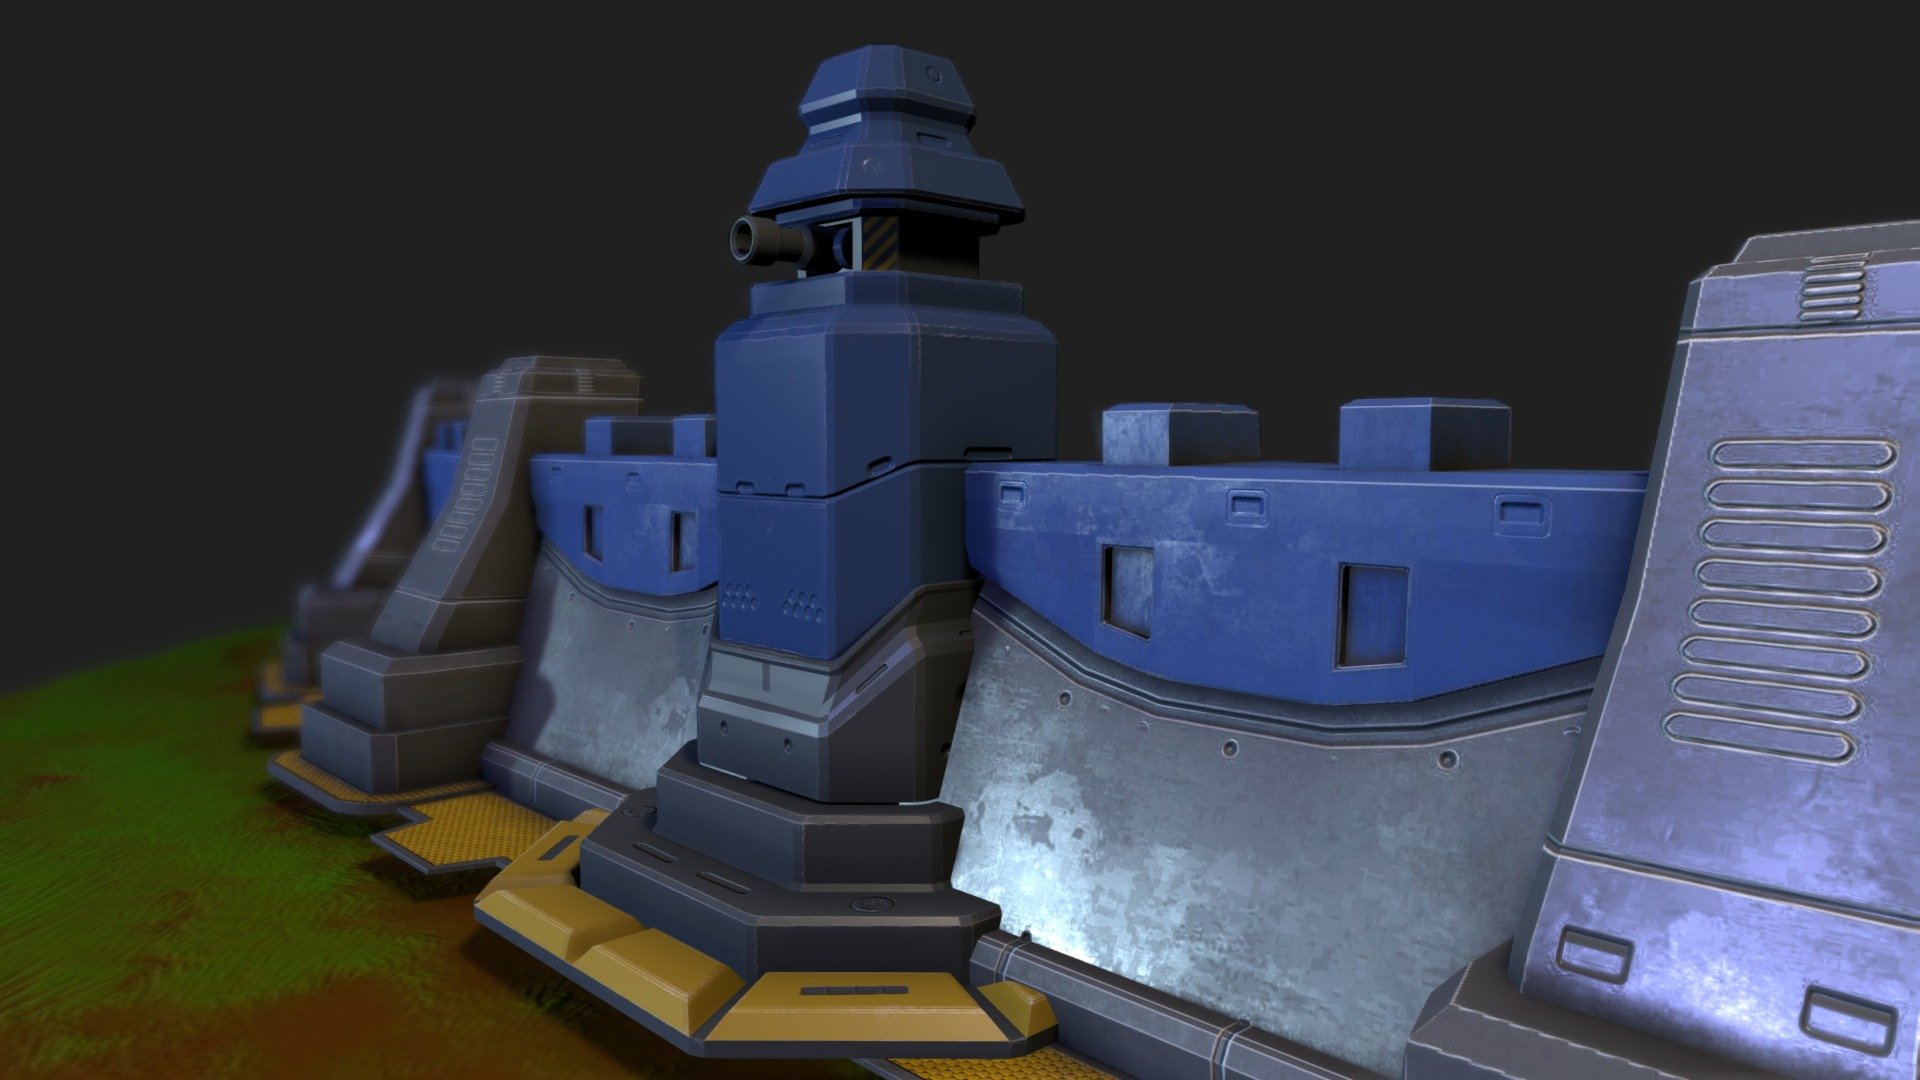 If you like tower defense games ore games like dota and Blizzard's Heroes of the Storm then this model is for you.  The components are subdivided into pieces so that you can tailor the model to your liking as well as create your own unique animations for your project using the modular structure 3d model